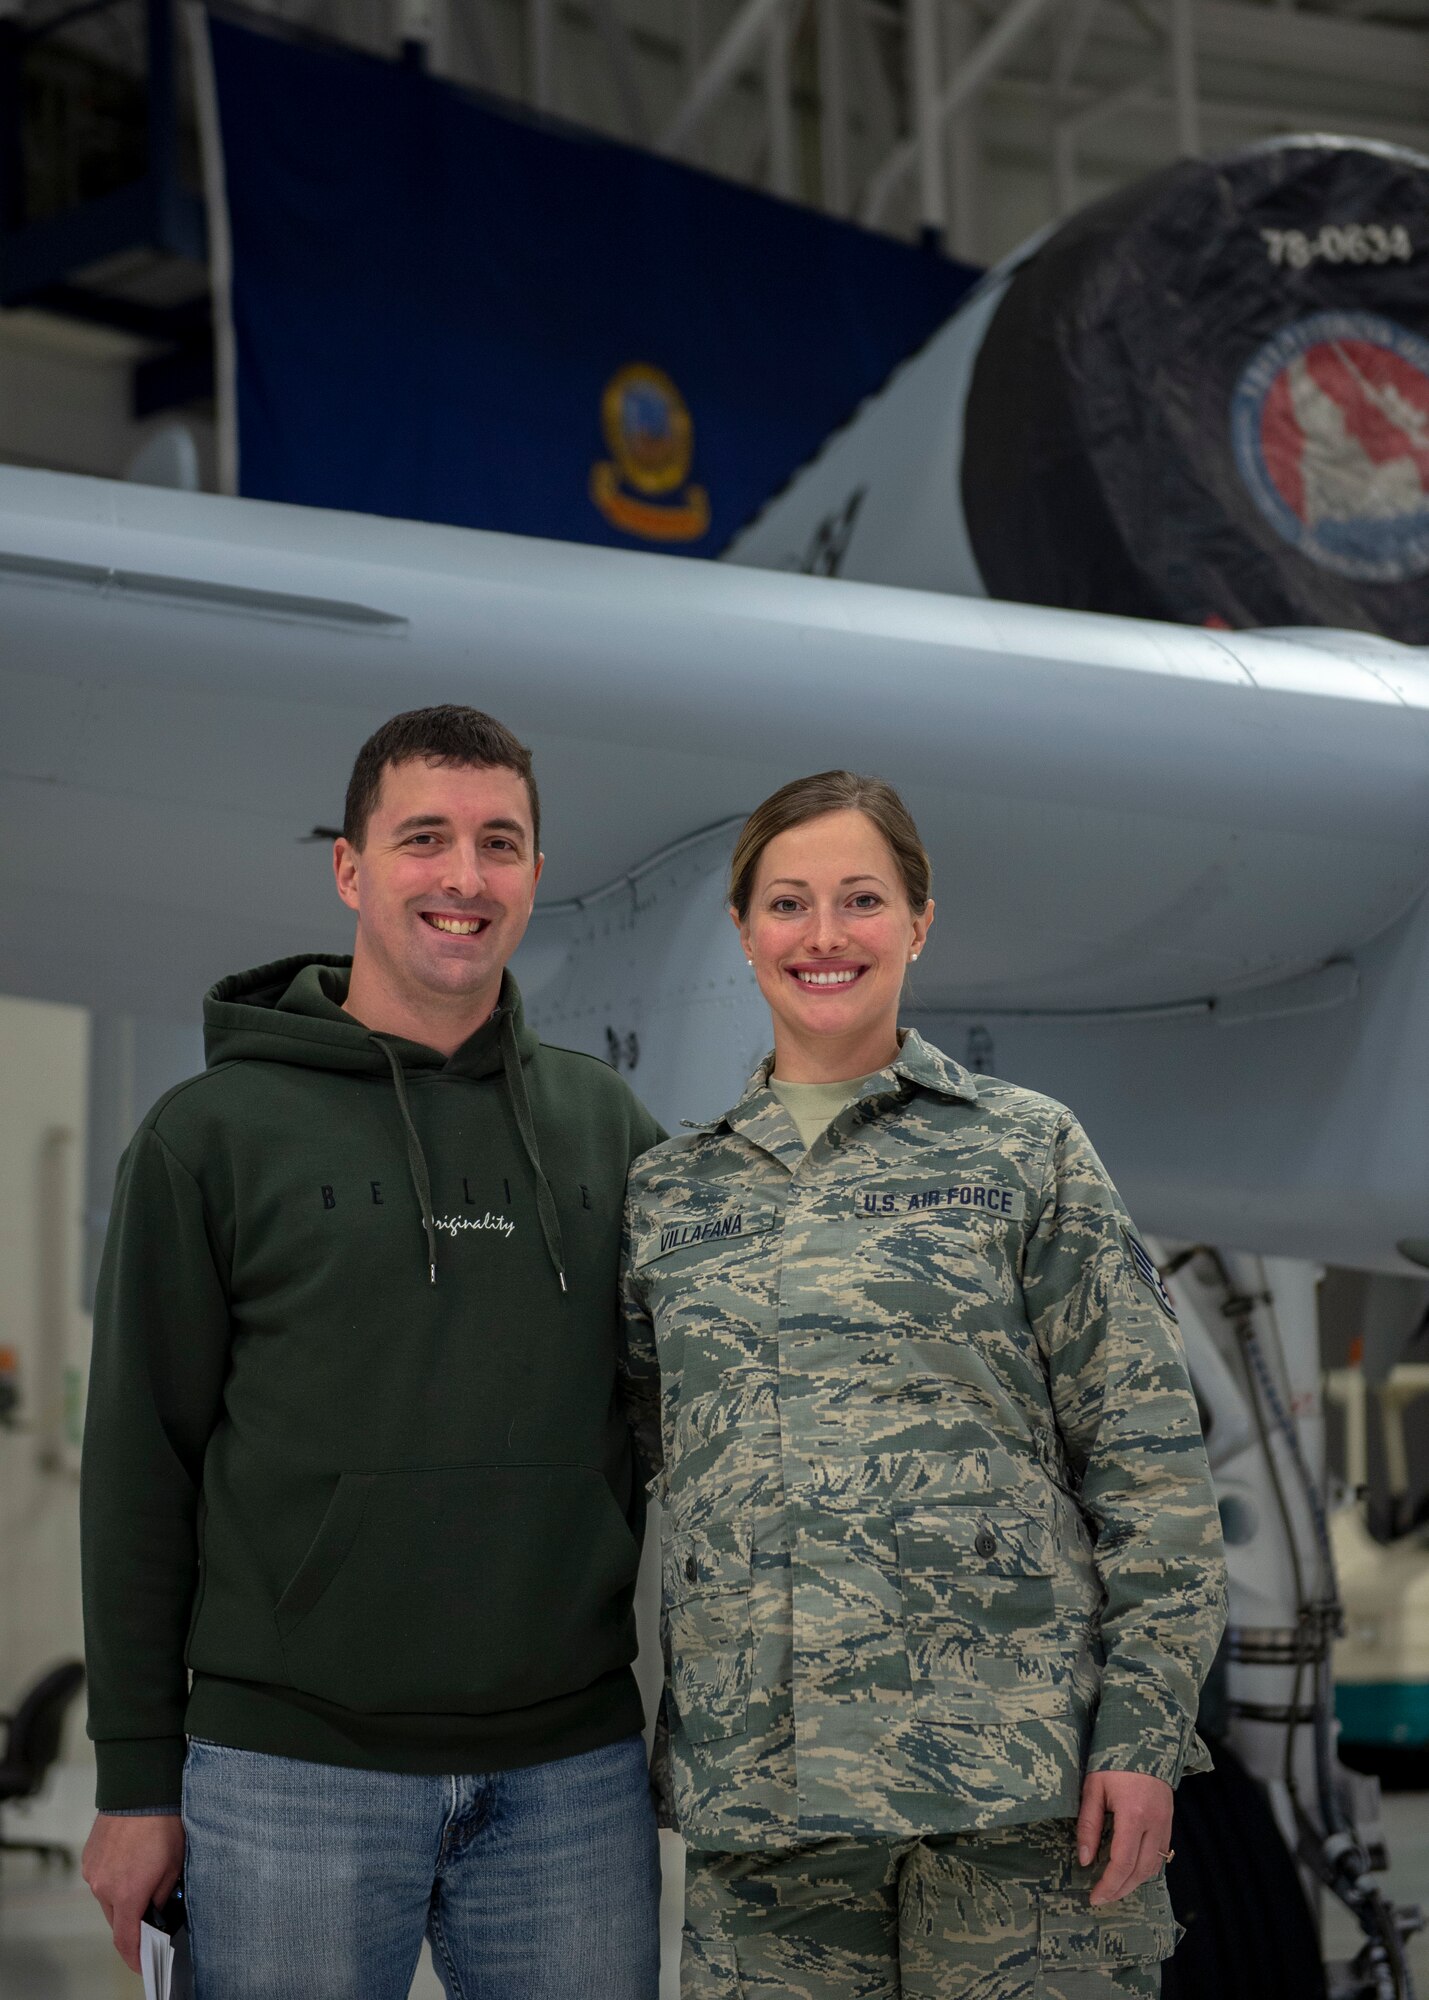 Staff Sgt. Mason Allen stands next to his sister, Staff Sgt. Camas Villafana, in front of an A-10 Thunderbolt II assigned to the 124th Fighter Wing, Gowen Field, Boise, Idaho, Feb. 20, 2020. Staff Sgt. Allen enlisted as a biomedical equipment specialist with the 124th Medical Group on Feb. 20, 2020. (U.S. Air National Guard photo by Ryan White)